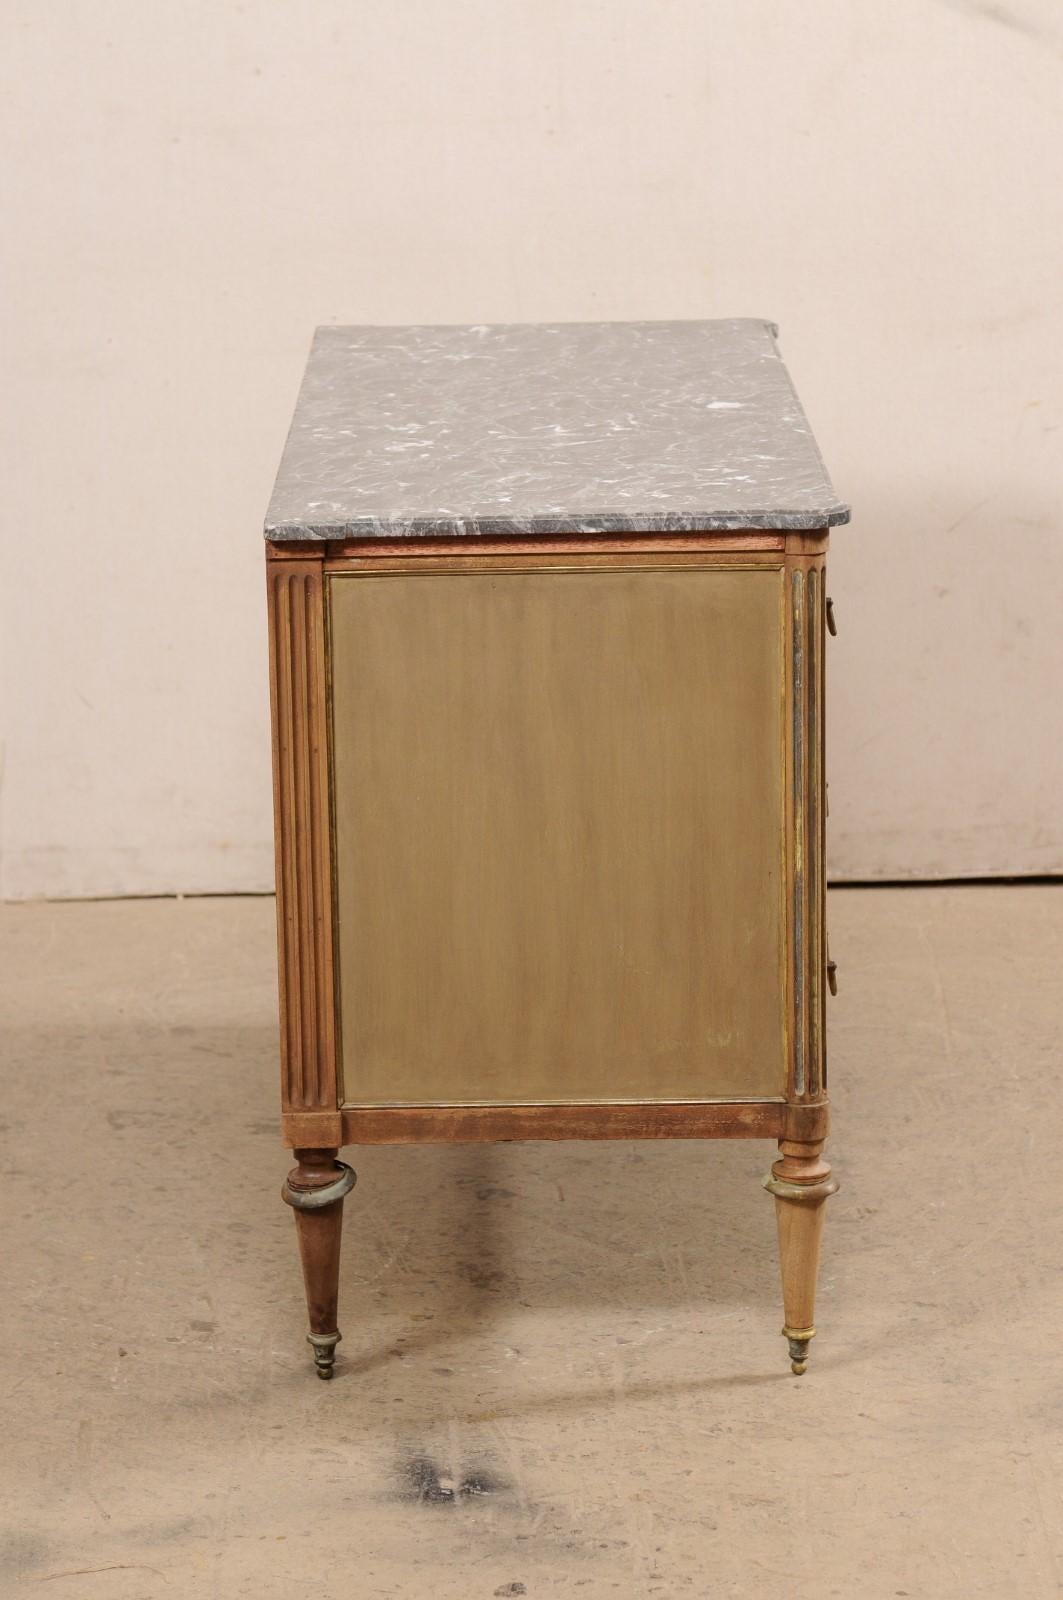 19th Century Neoclassic Commode w/its Original Gray Marble Top & Brass Trimmings/Hardware